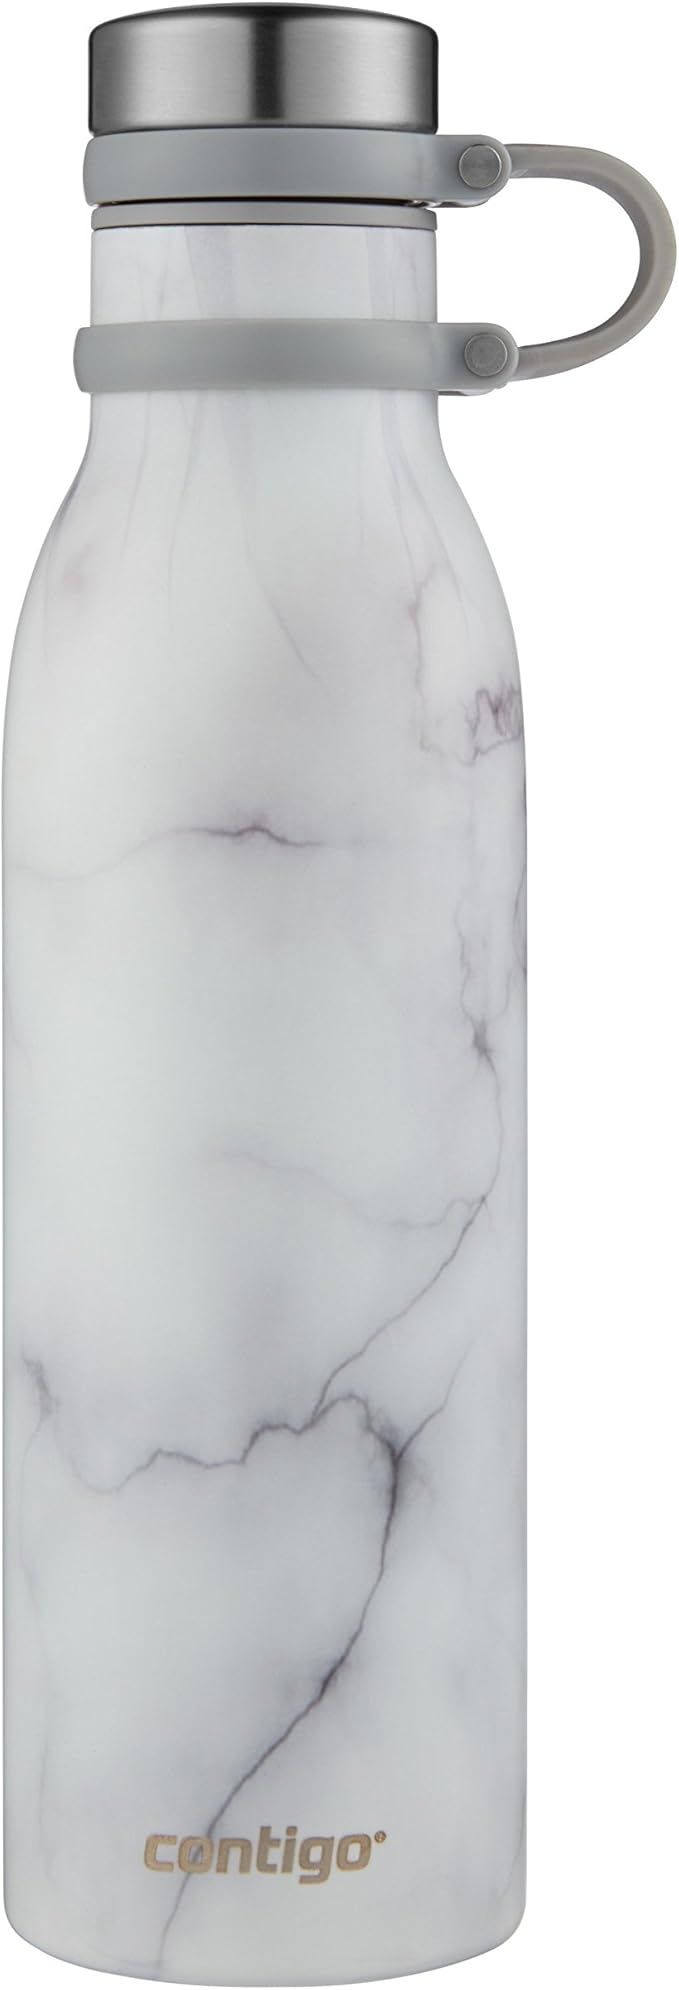 Contigo Couture Vacuum-Insulated Stainless Steel Water Bottle, 20 oz, White Marble | Amazon (US)